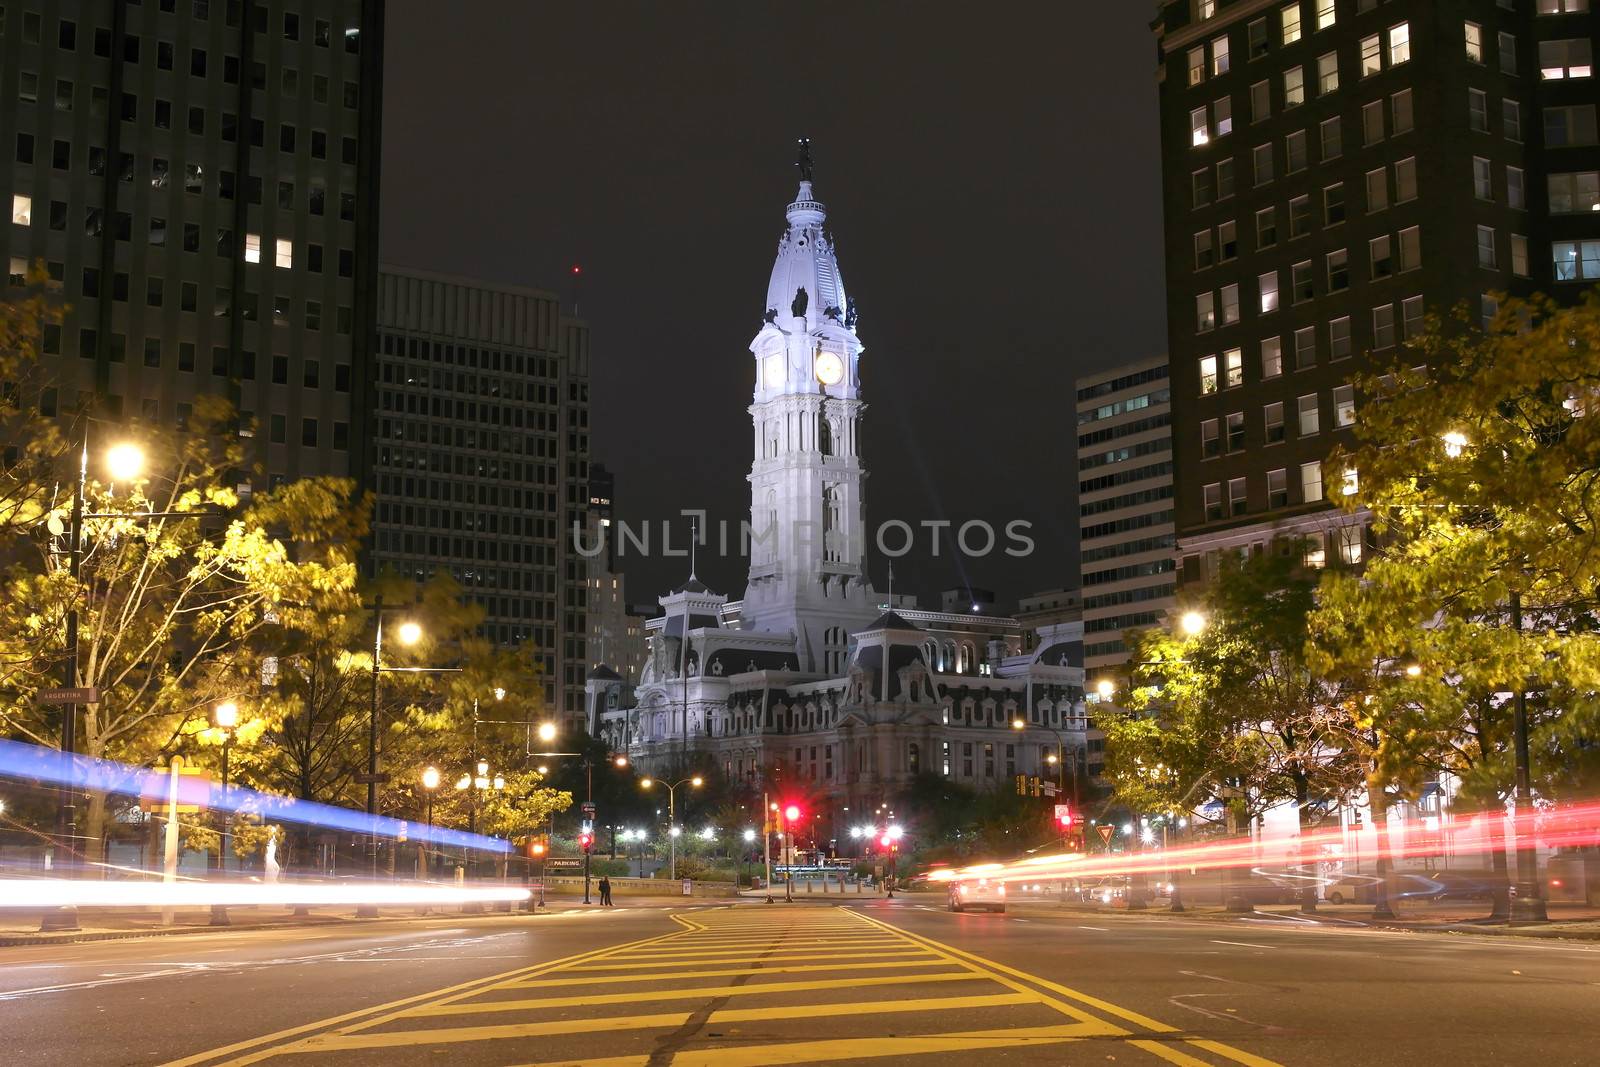 The Philadelphia City Hall building at night by gary718